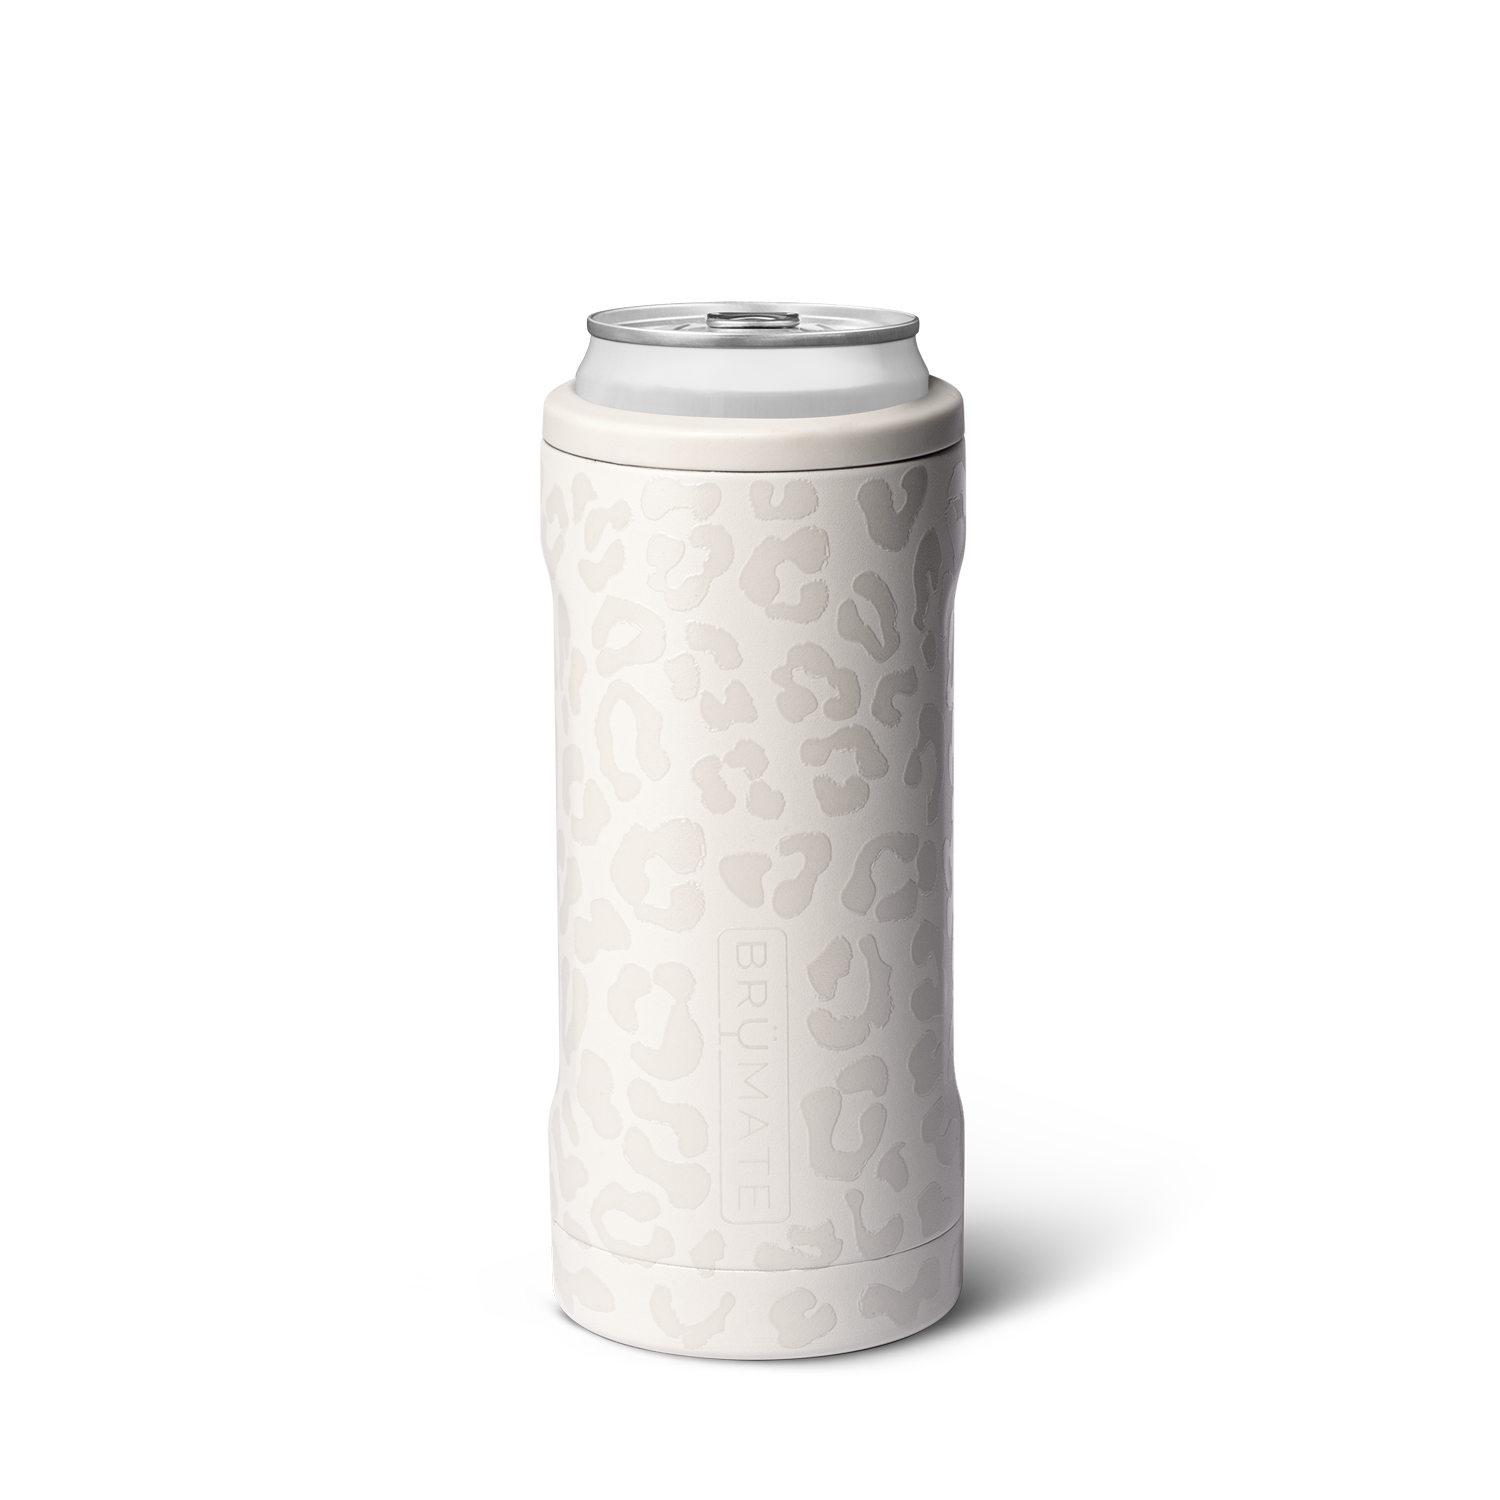 limestone leopard hopsulator slim can cooler is white with gray leopard spots all over against a white background